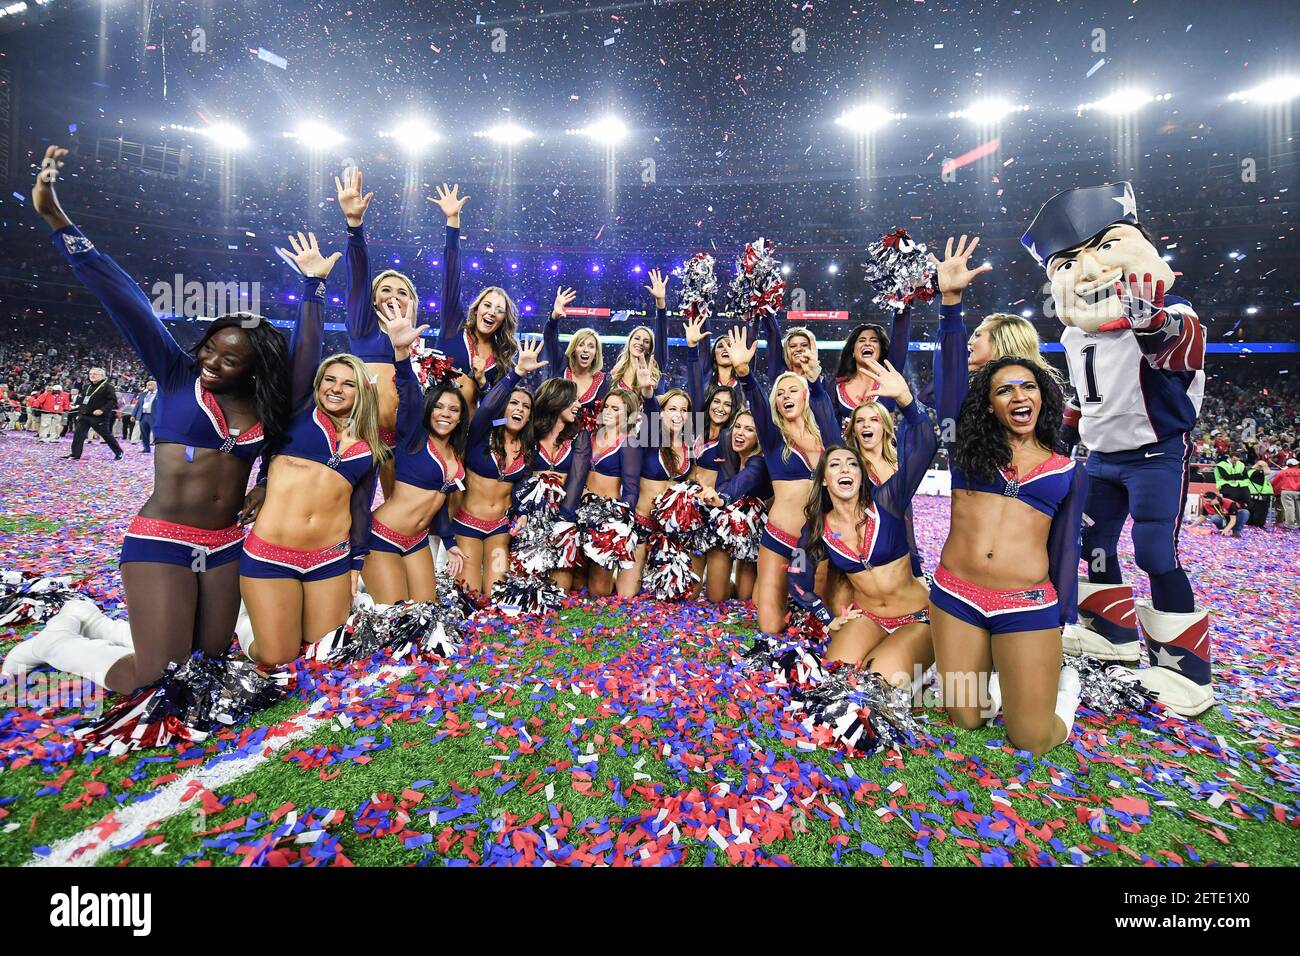 New England Patriots cheerleaders celebrate during the post game ceremony  for Super Bowl LI after they defeated the Atlanta Falcons 34-28 in overtime  held at the NRG Stadium on February 5, 2017